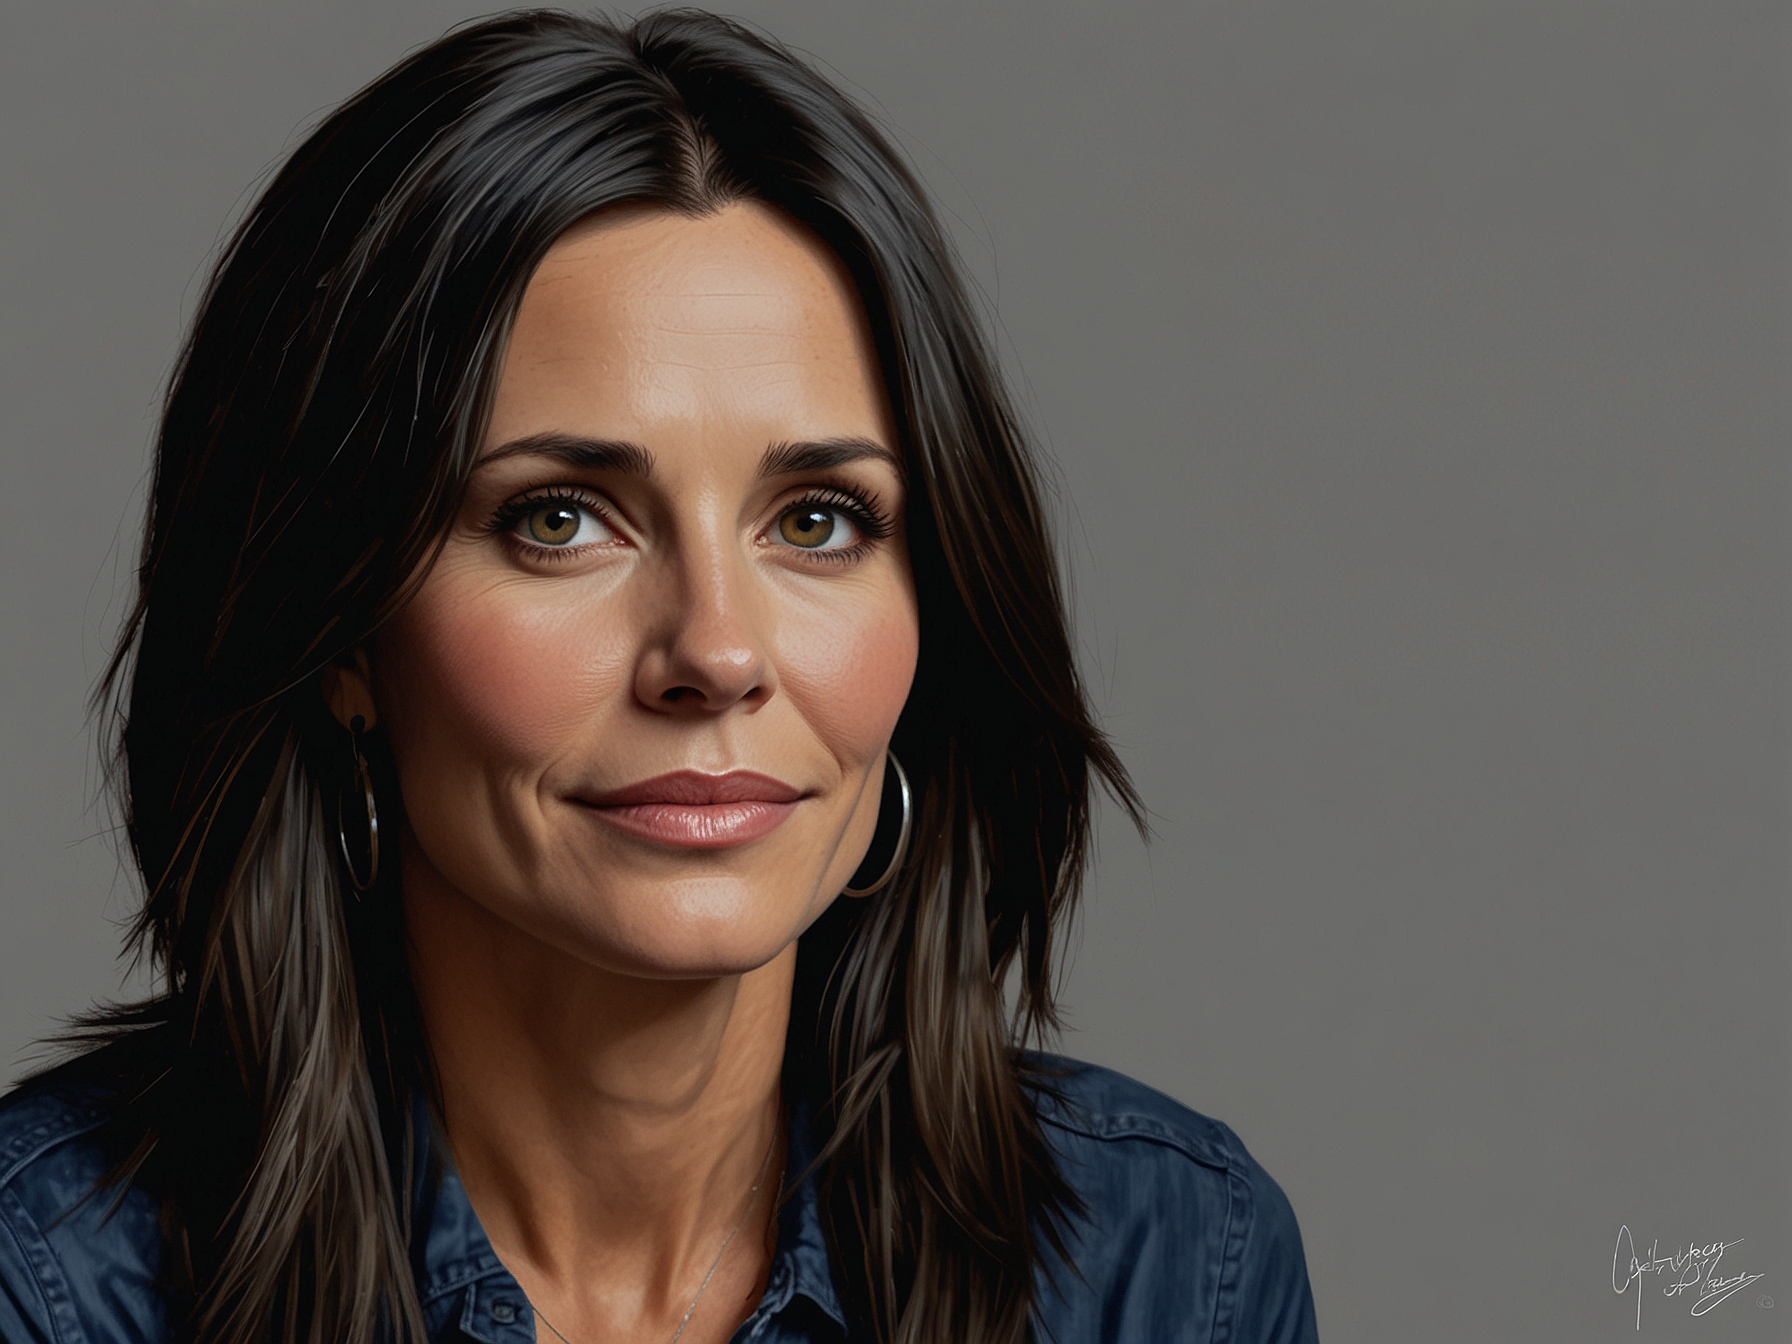 Courteney Cox shares a candid moment on set, showcasing her natural look and authenticity. This image captures her down-to-earth personality and her acceptance of aging with confidence.